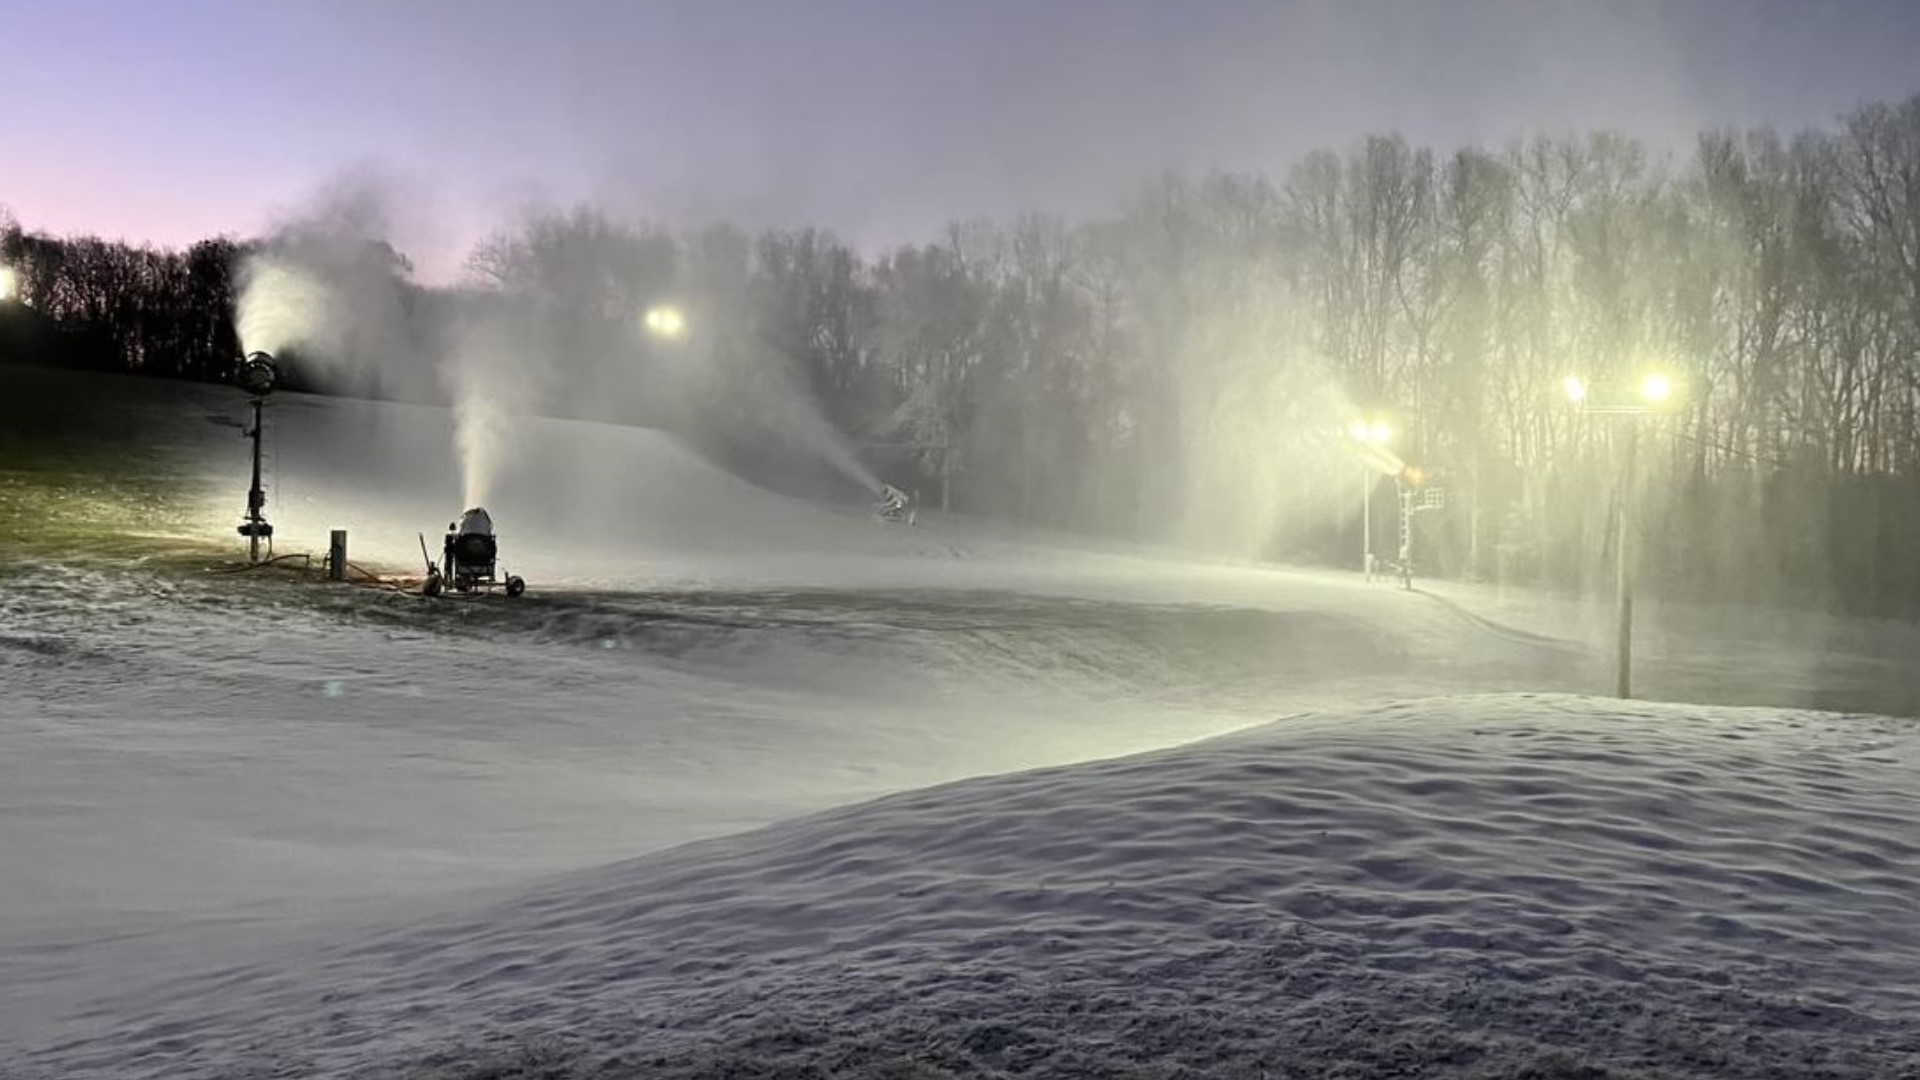 Snowmaking started last week, and crews hope opening day will be Dec. 26